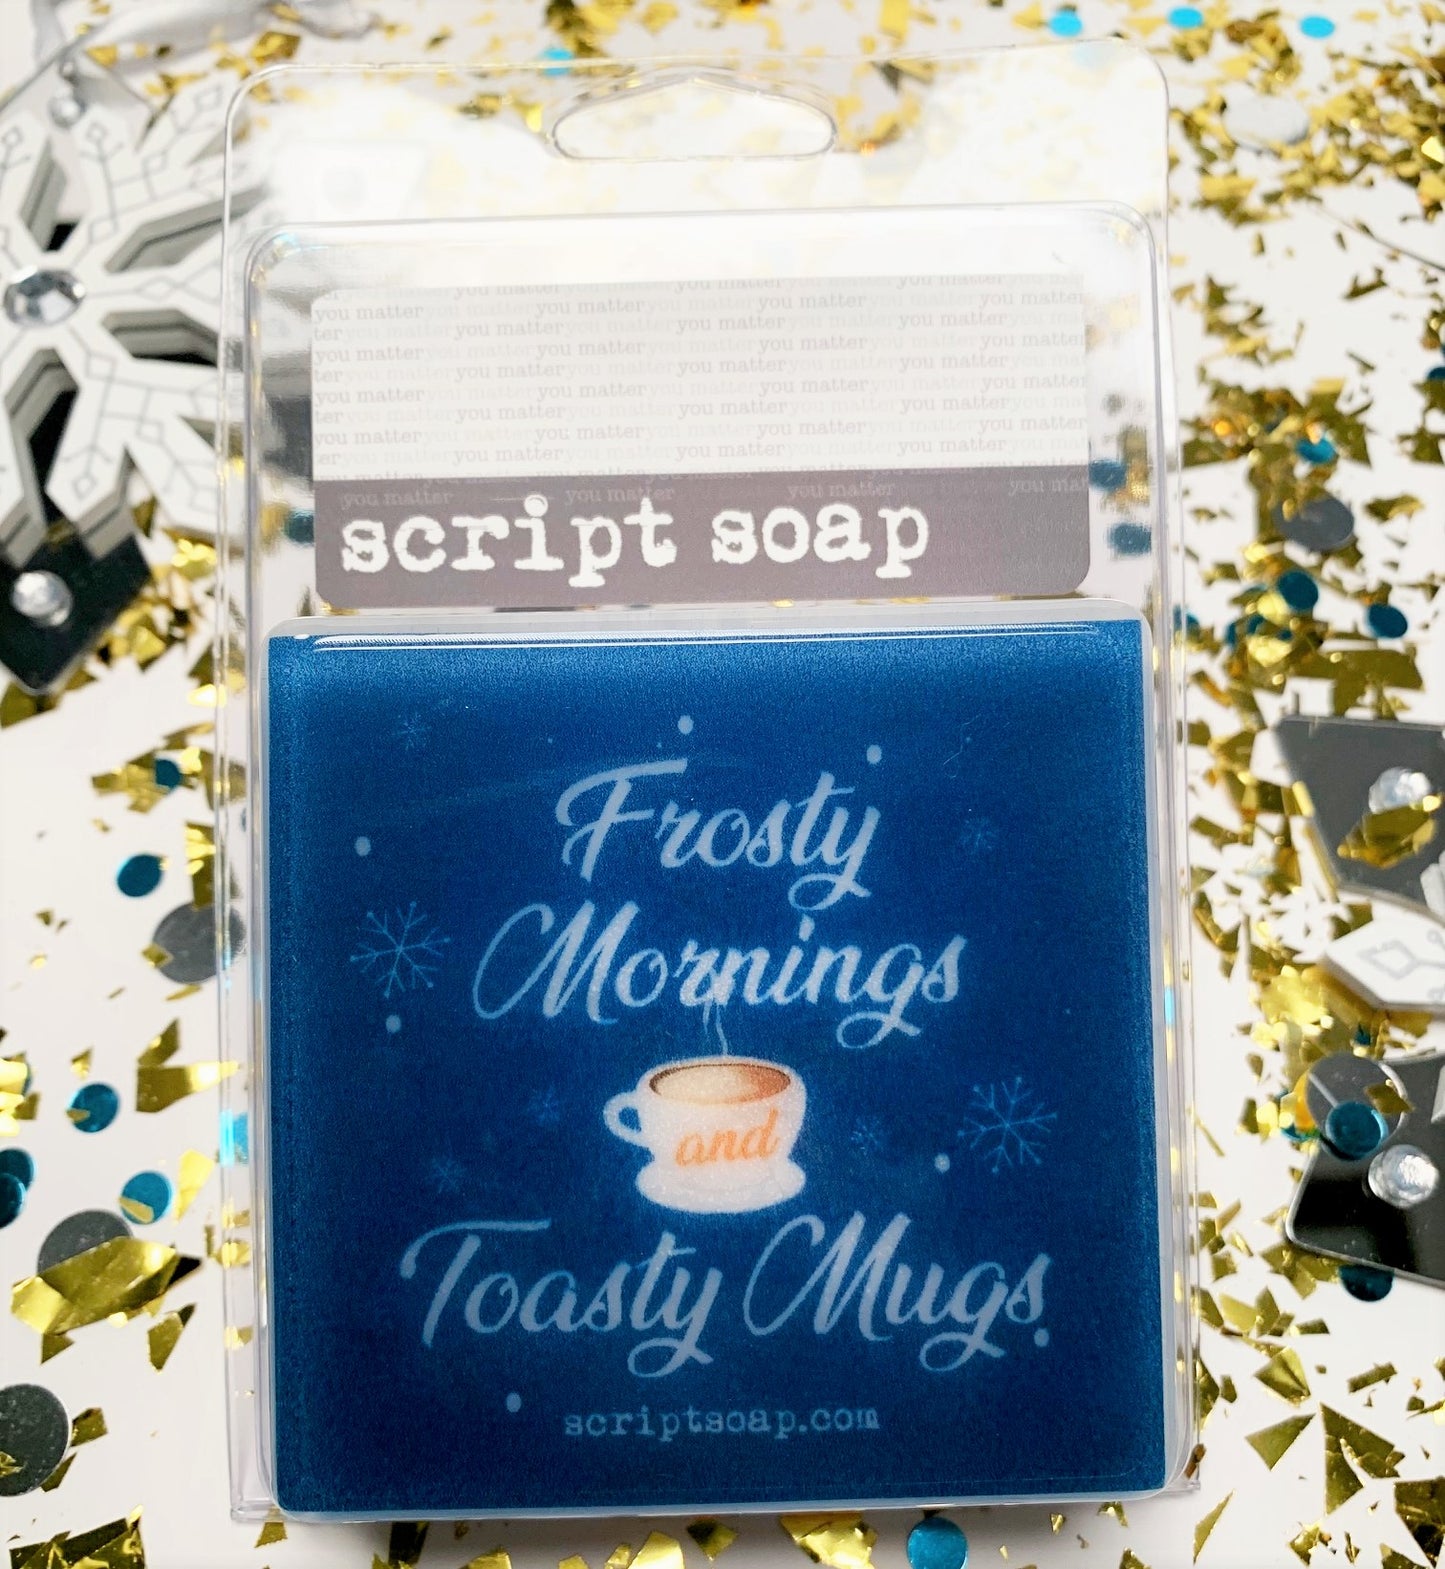 FROSTY MORNINGS AND TOASTY MUGS Script Soap